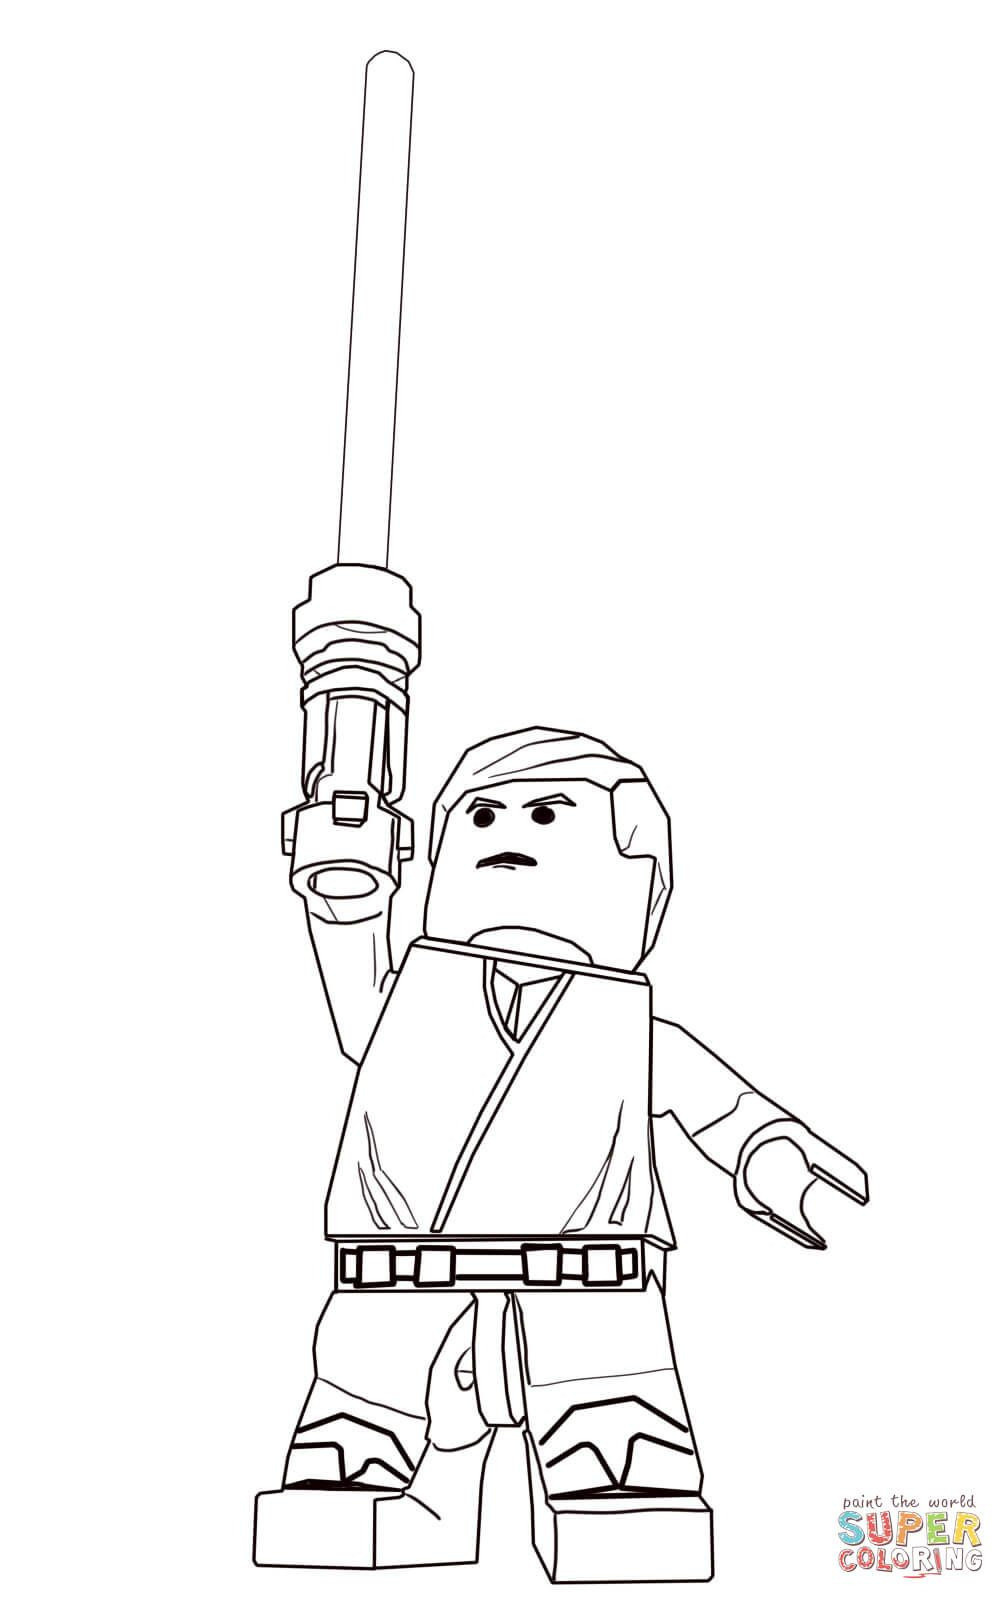 lego star wars malvorlagen inspirierend lego star wars 3 coloring pages free lego christmas coloring pages sammlung